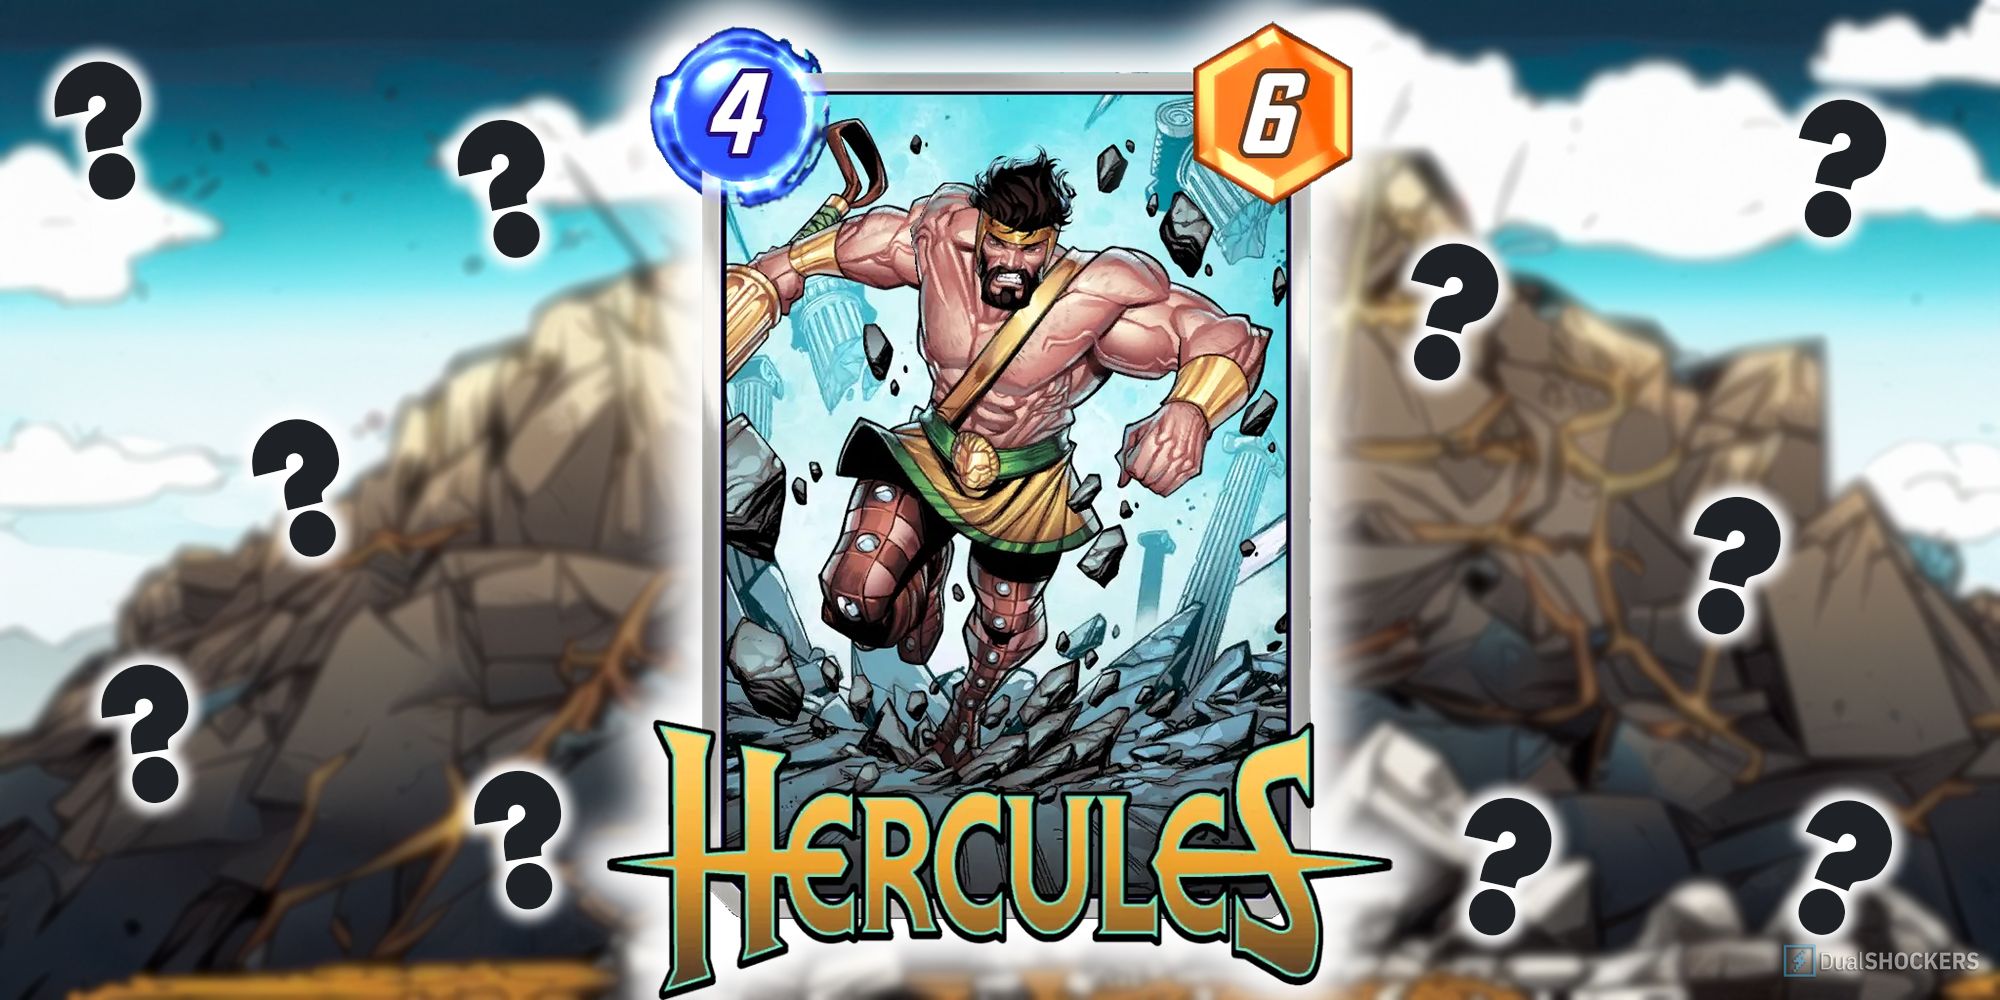 Marvel Snap's Hercules card surrounded by question marks.